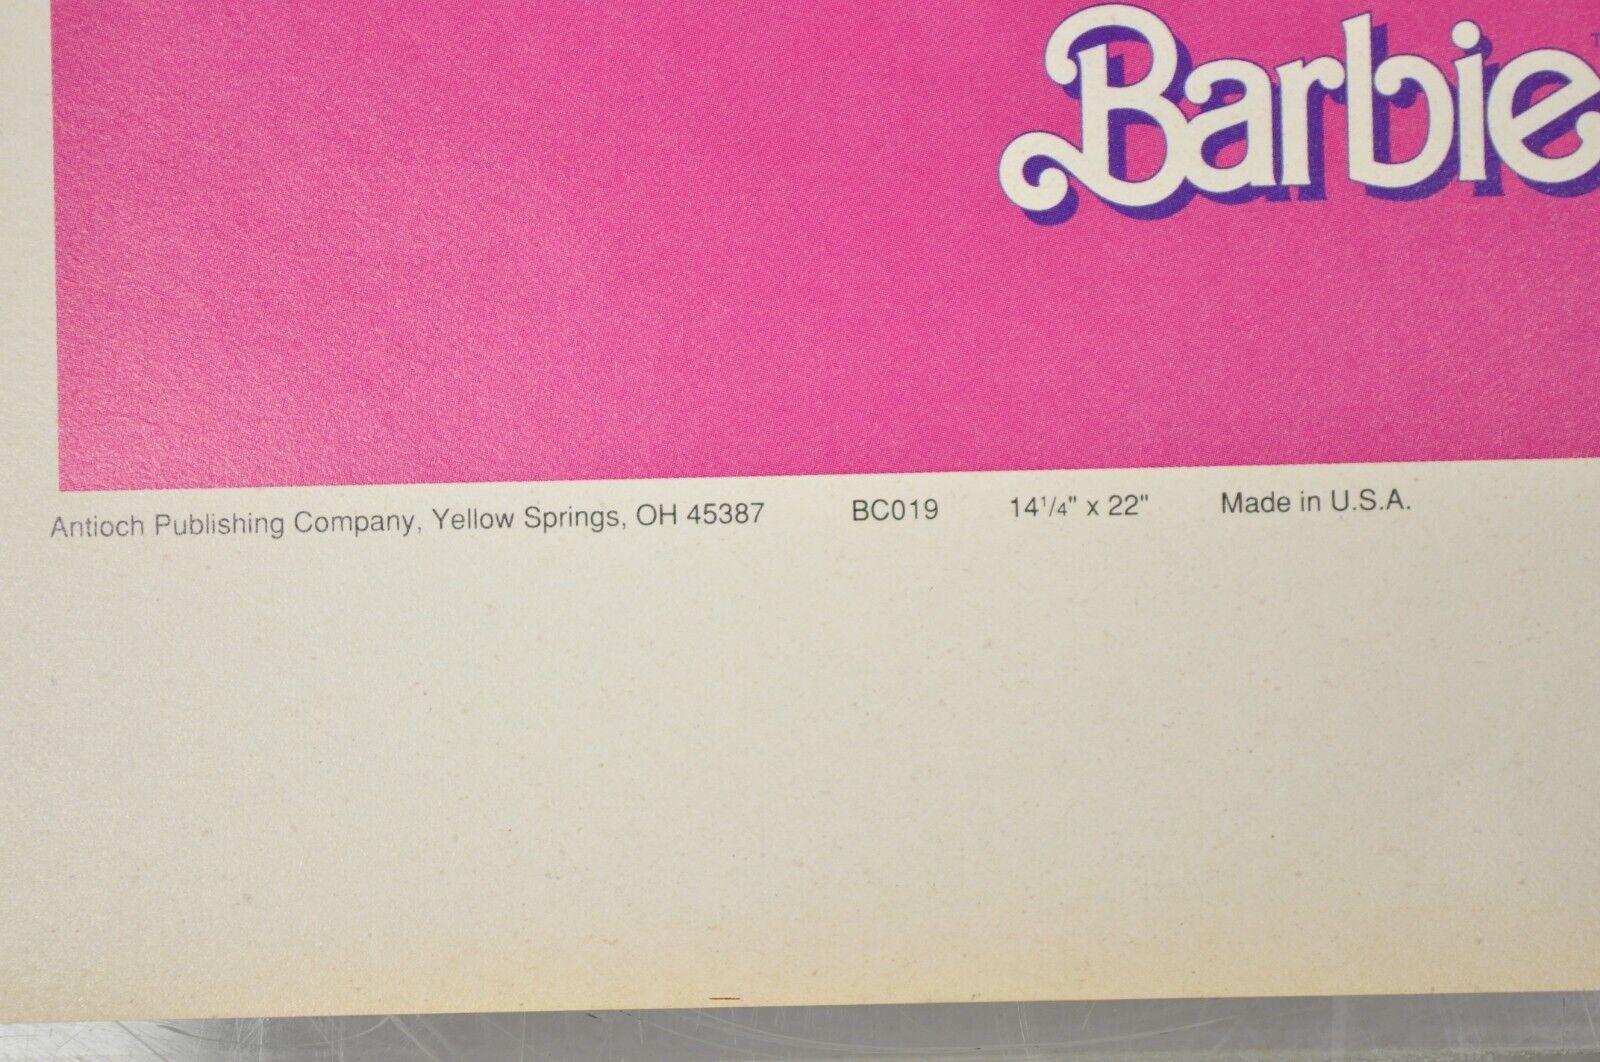 Vintage 1989 Barbie Mattel Original Pink Paper Book Covers NOS - Many Available For Sale 4